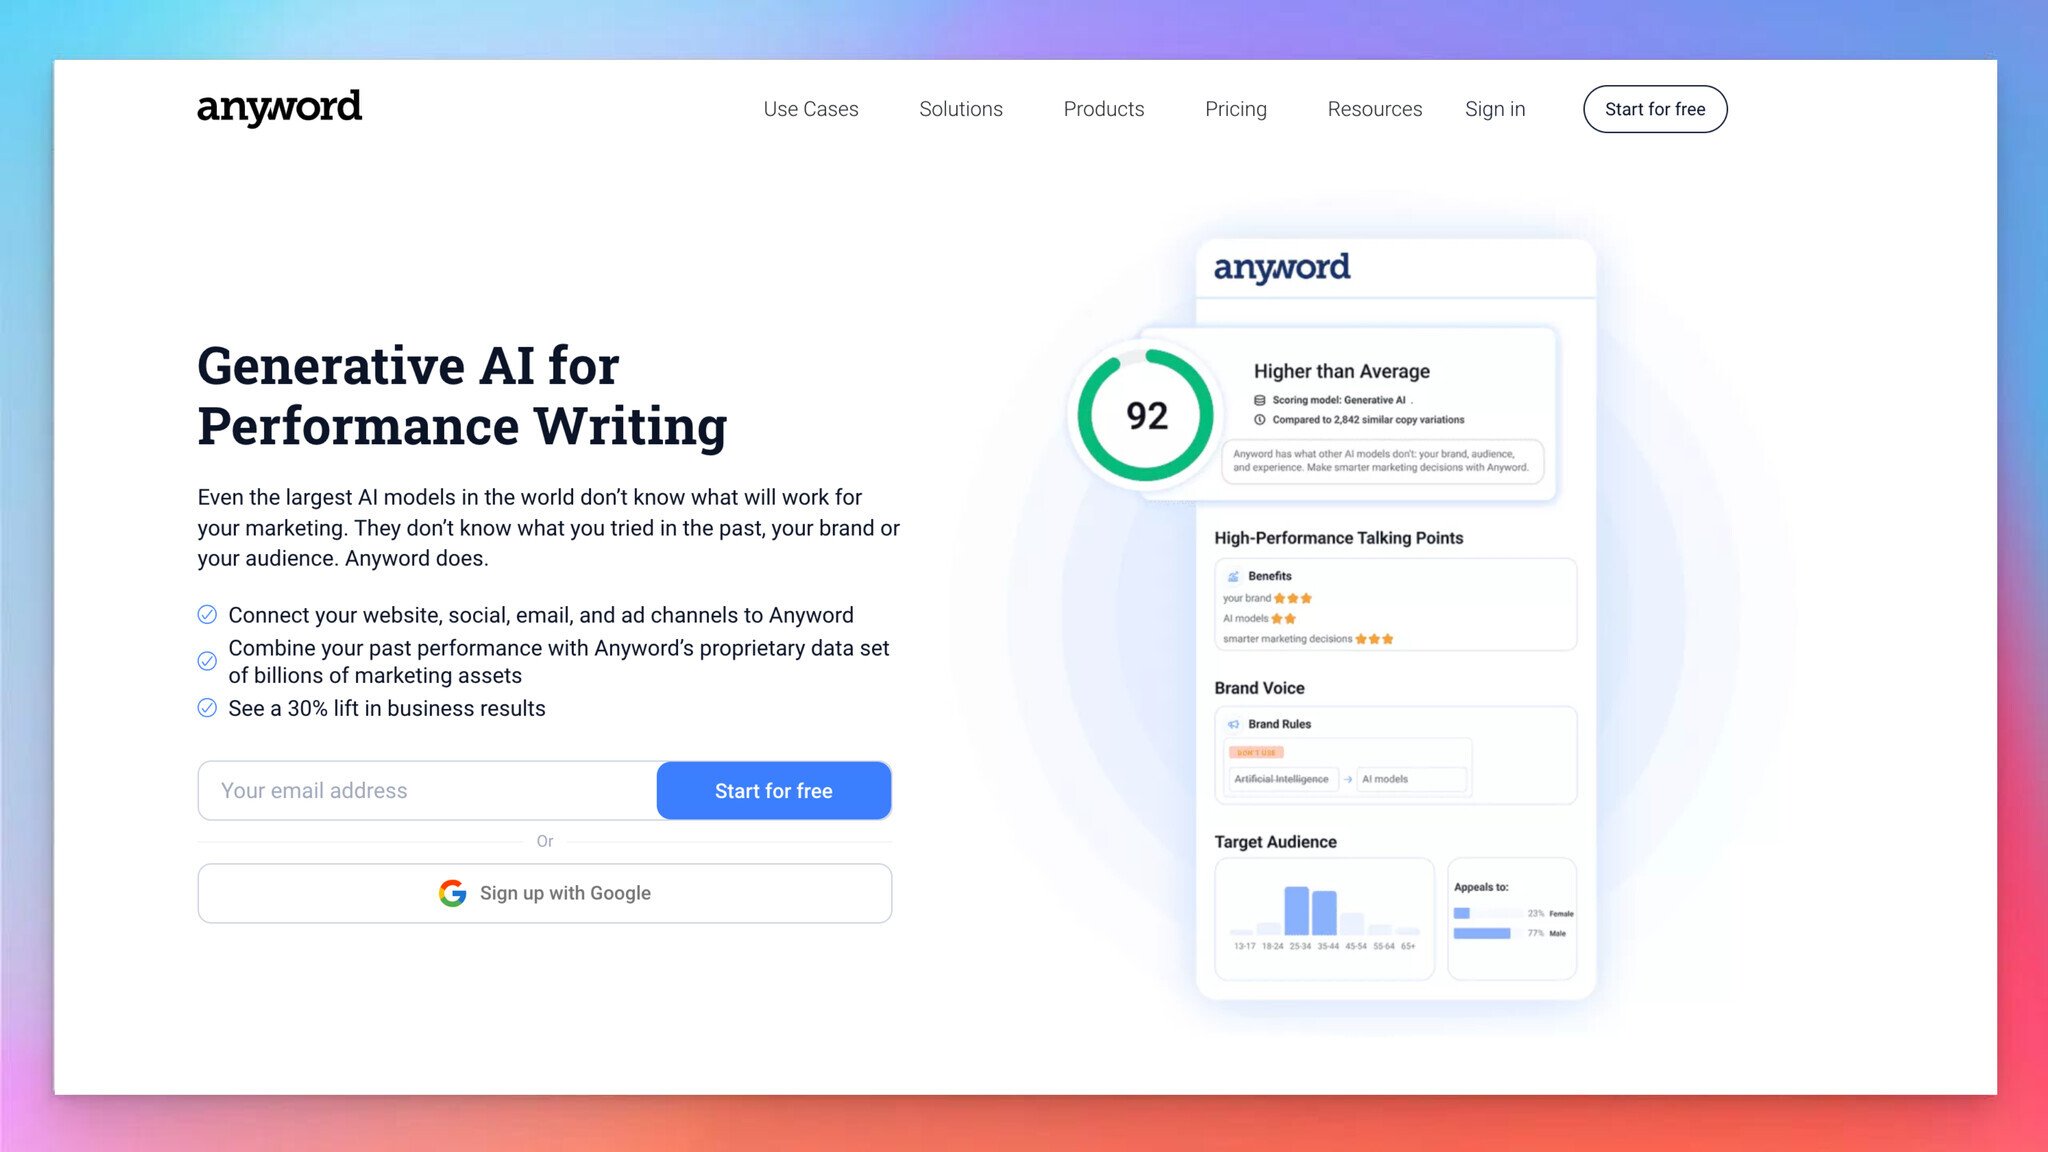 The homepage of Anyword which is one of the AI marketing tools